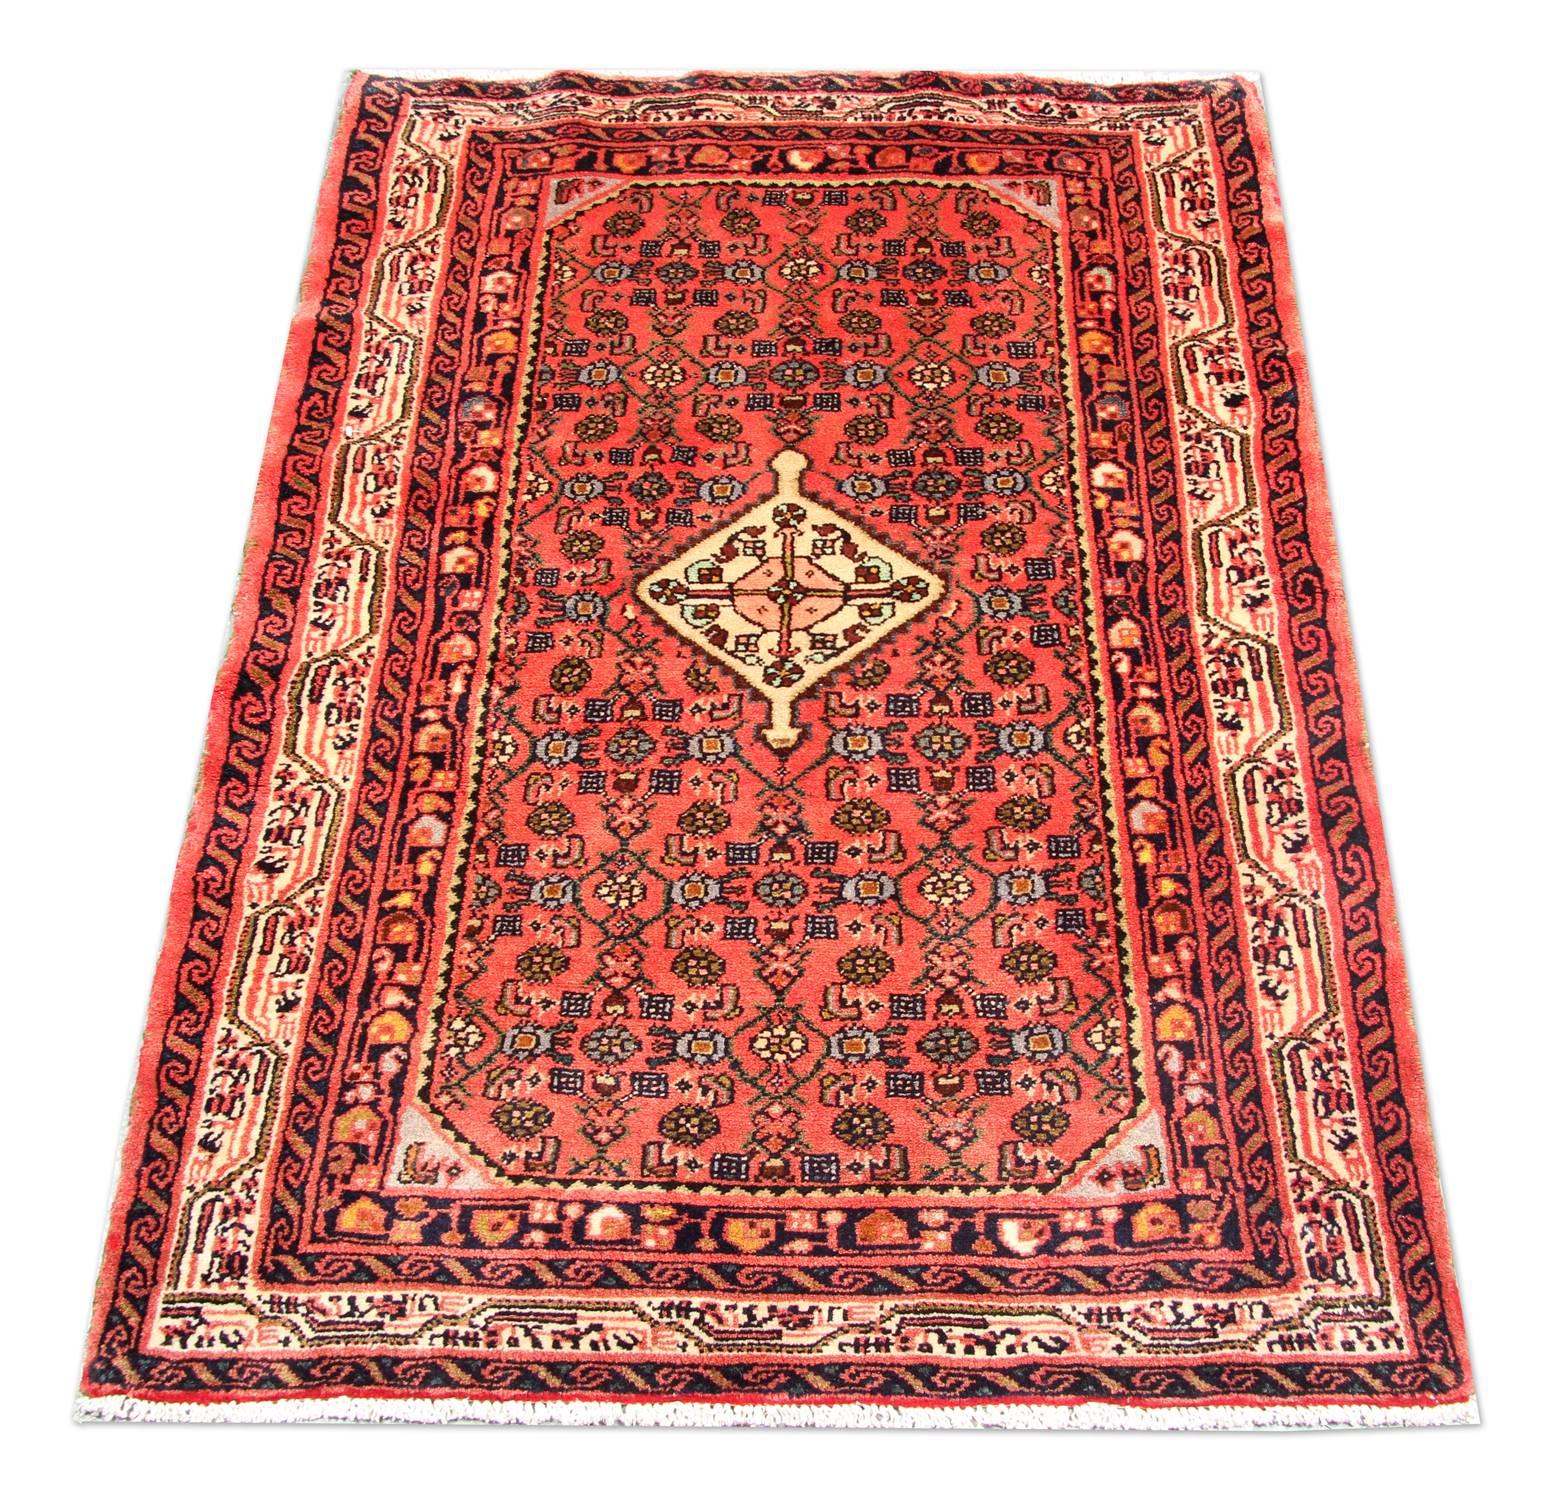 This fine wool rug was handwoven in Turkey with locally sourced materials in the 1970s. The central design features an elegant cream diamond medallion woven on a rich red background with a surrounding decorative design and a border woven with